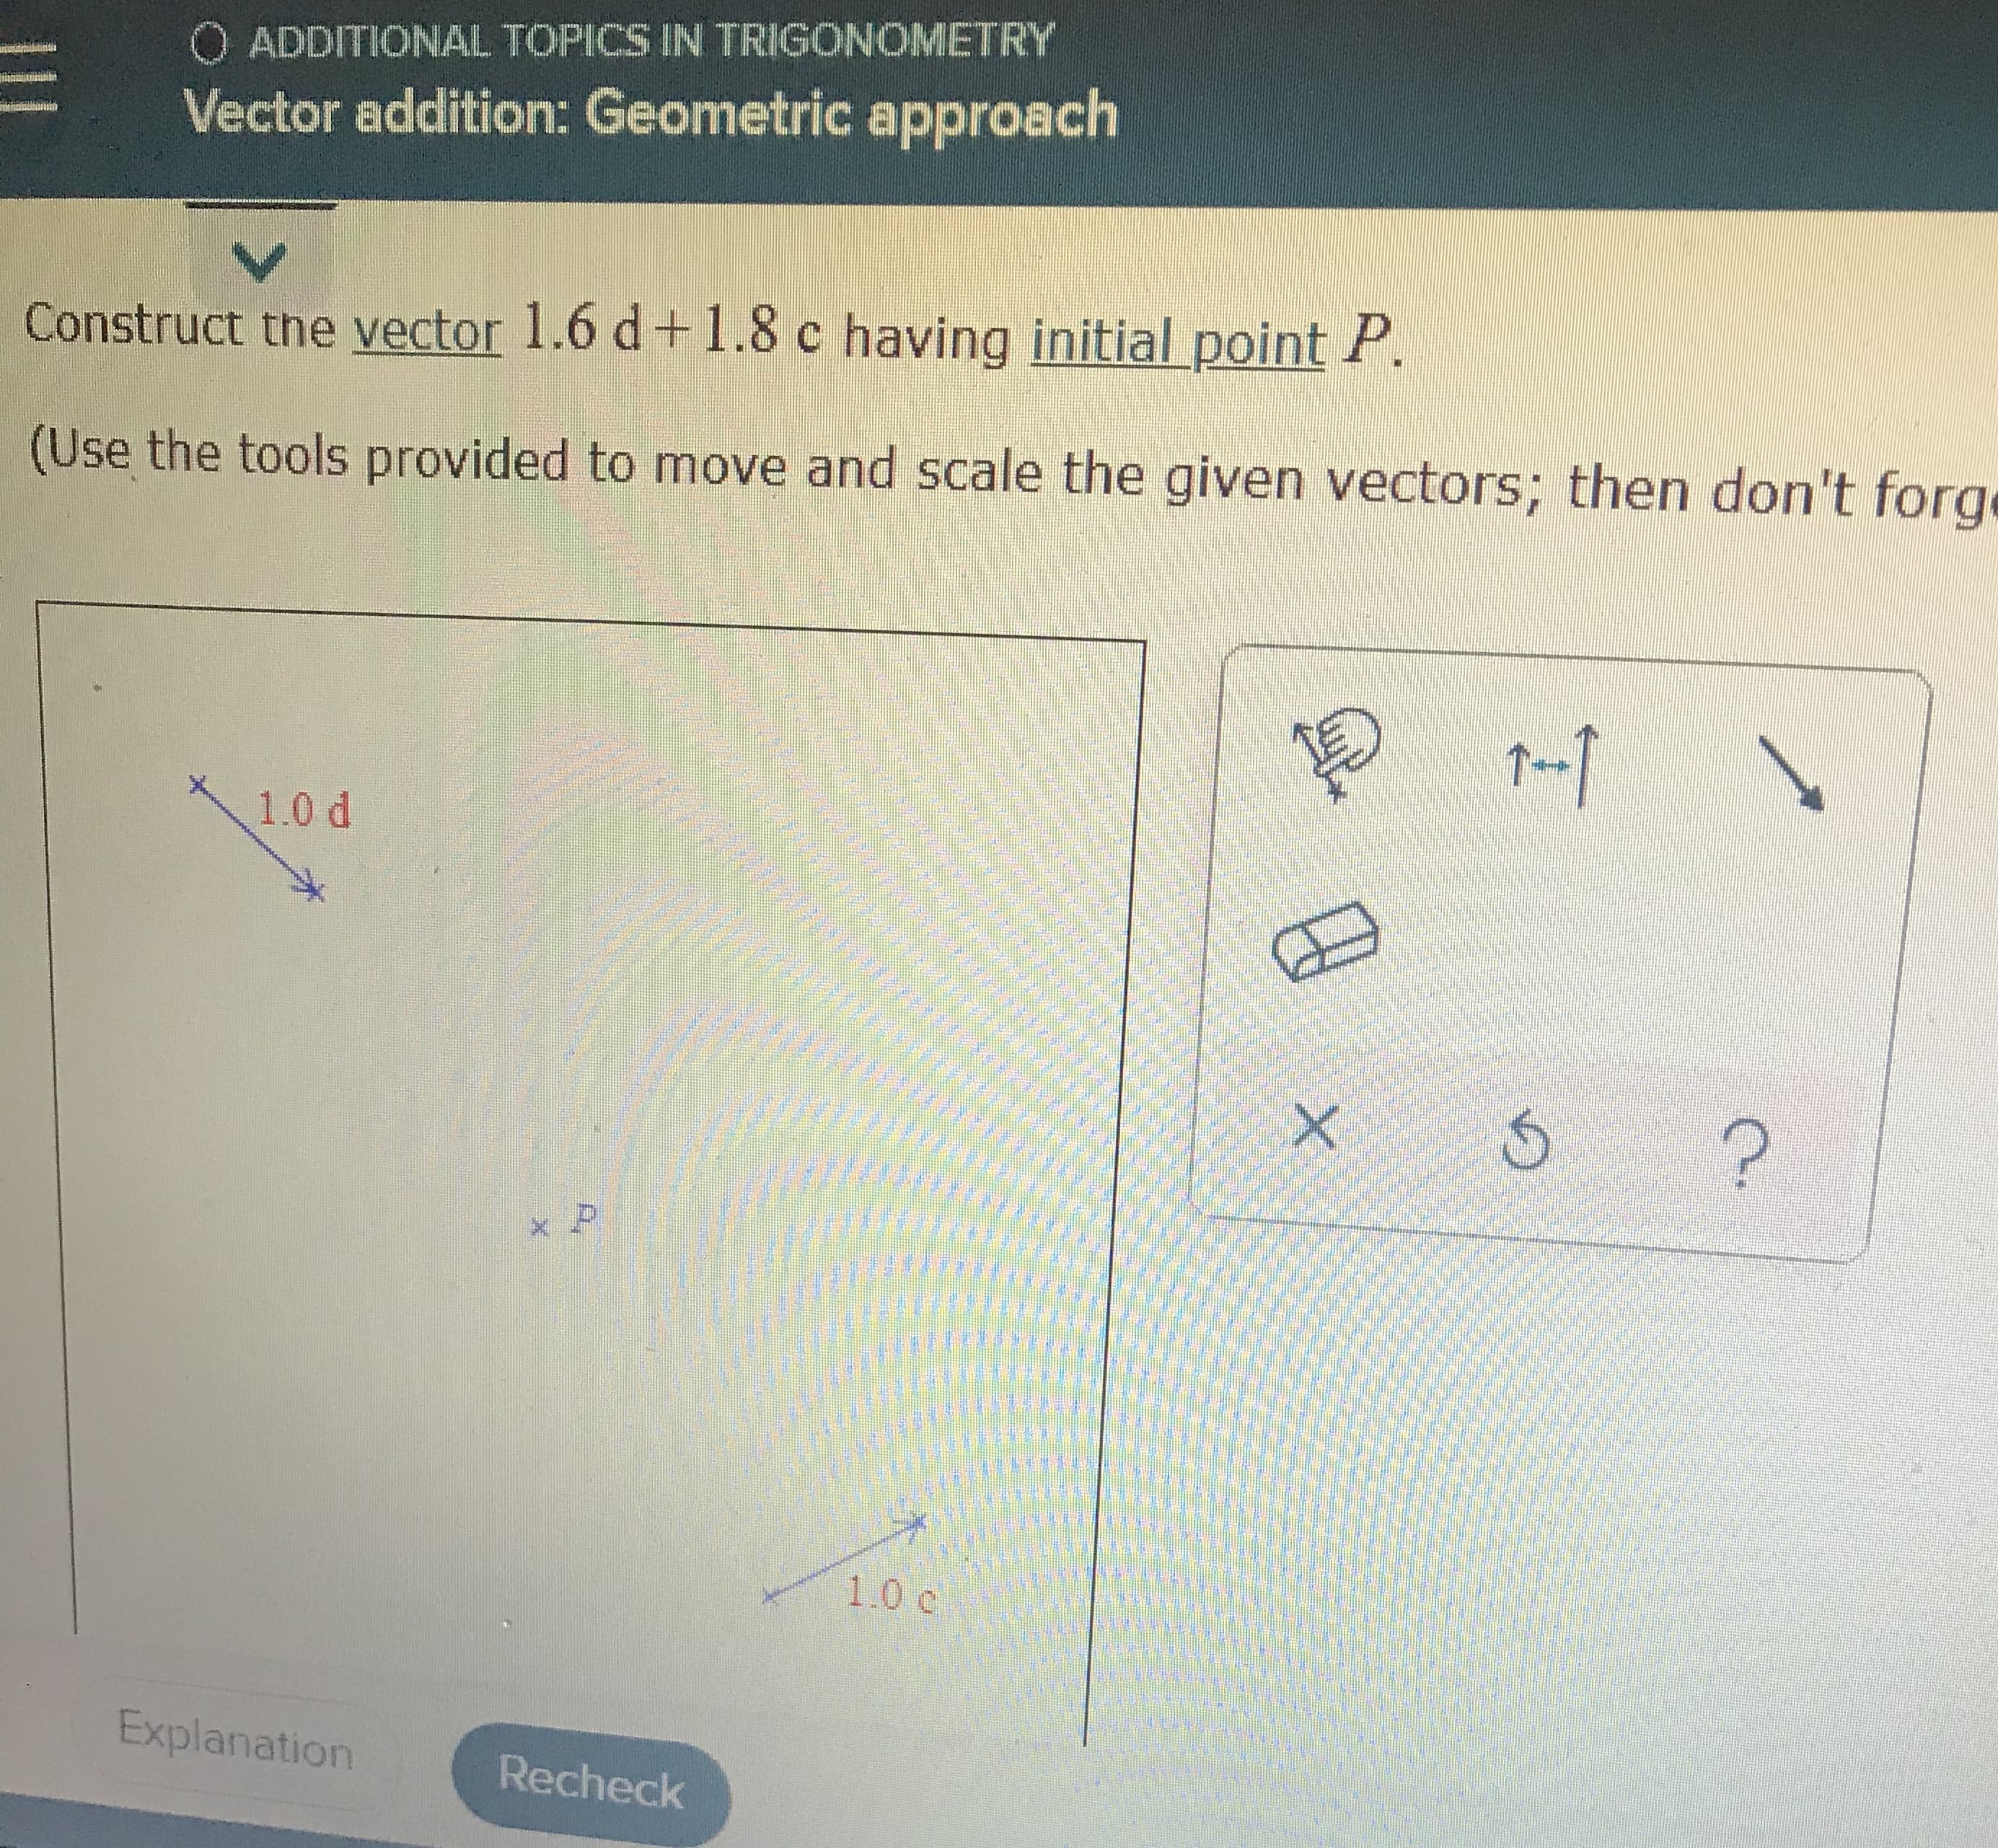 Construct the vector 1.6 d+1.8 c having initial point P.
